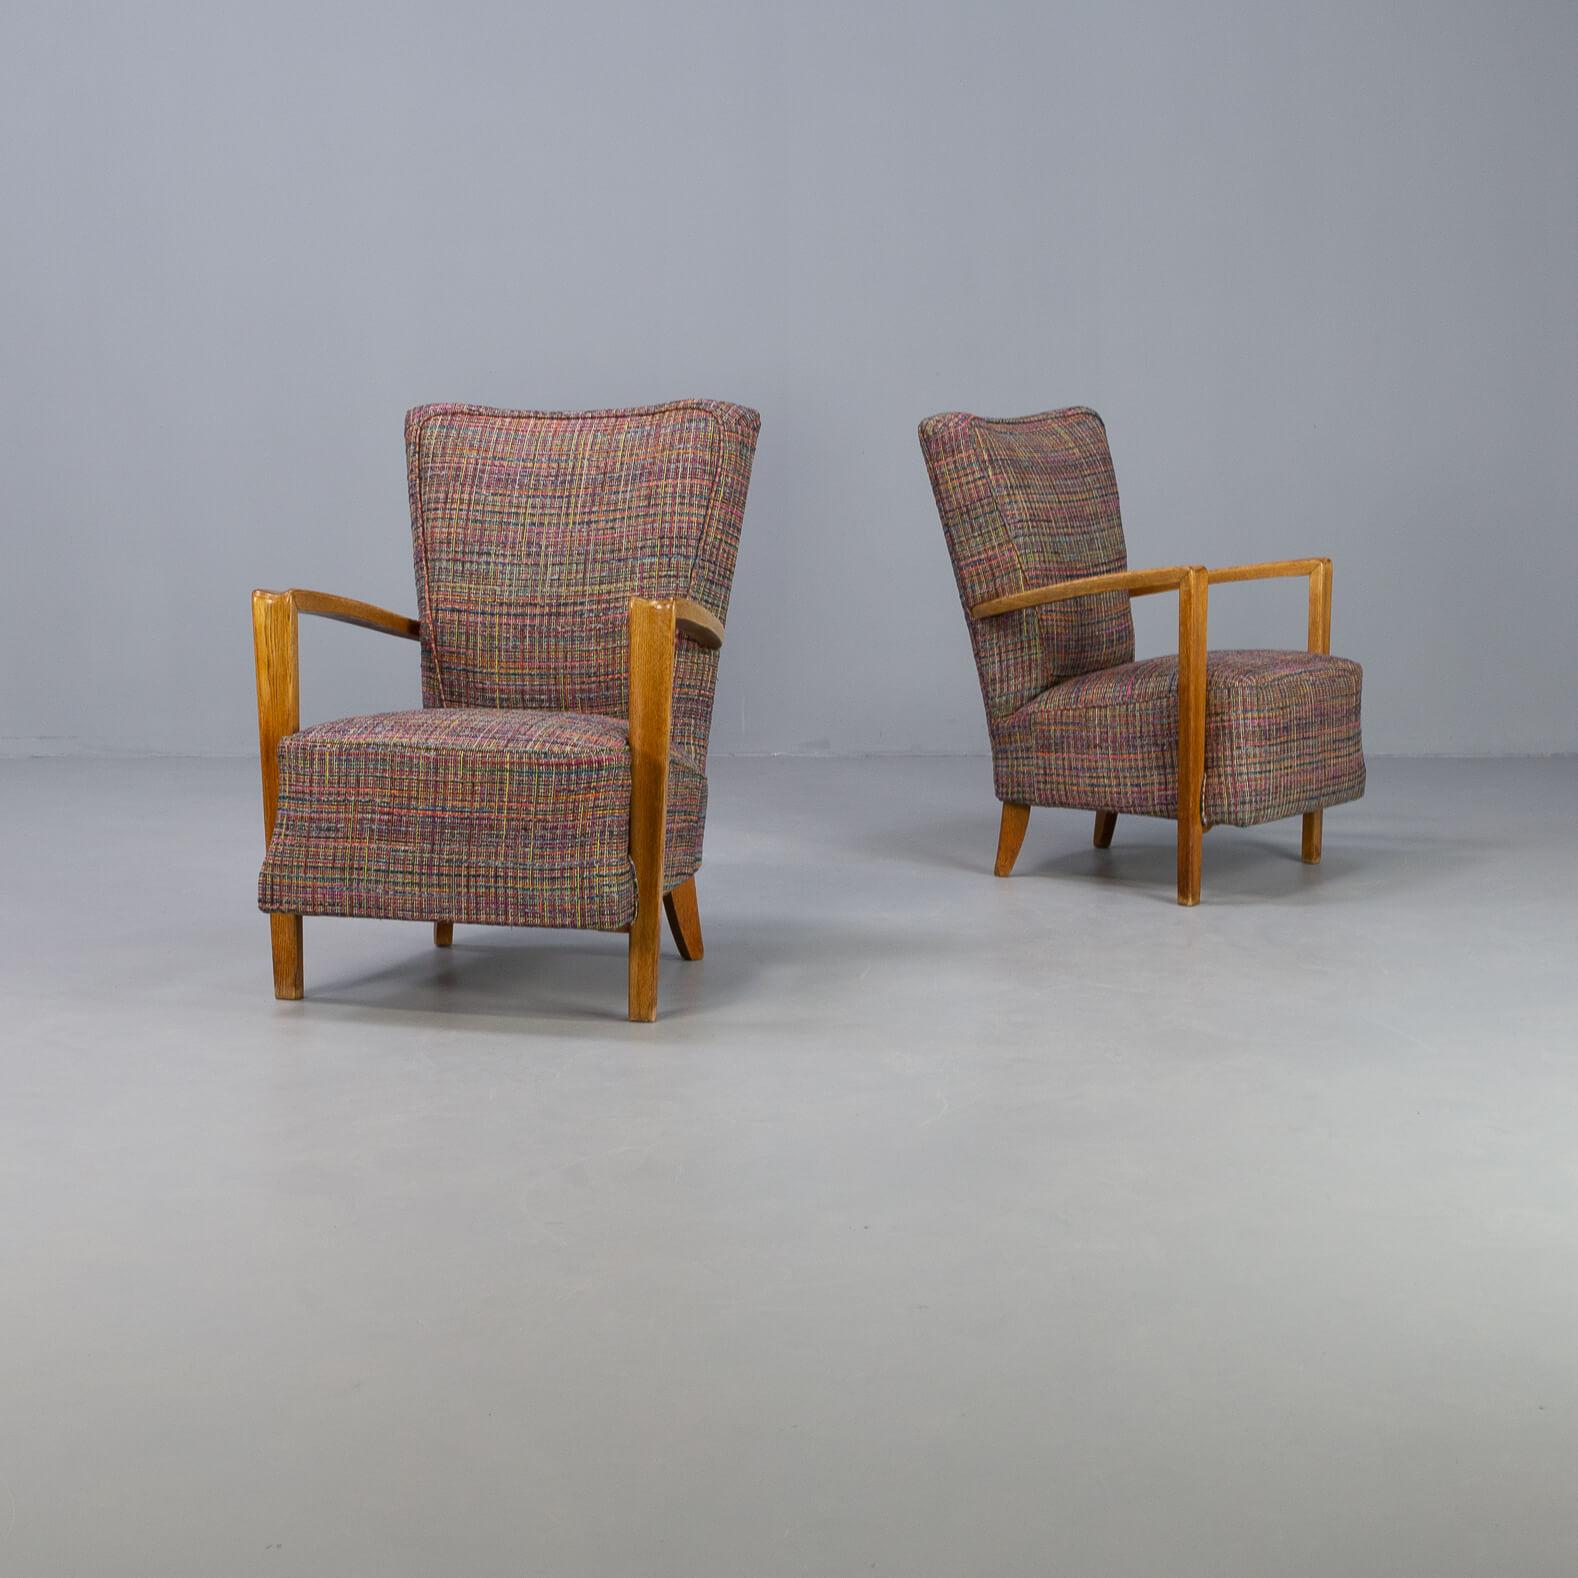 One amazingly beautiful set of two identical armchairs. Frame in oakwood includes beautiful details. The fabric is completely new upholstered Martigny multicolor fabric and the chairs have new singles for the seating. Original 1960s chairs fully new